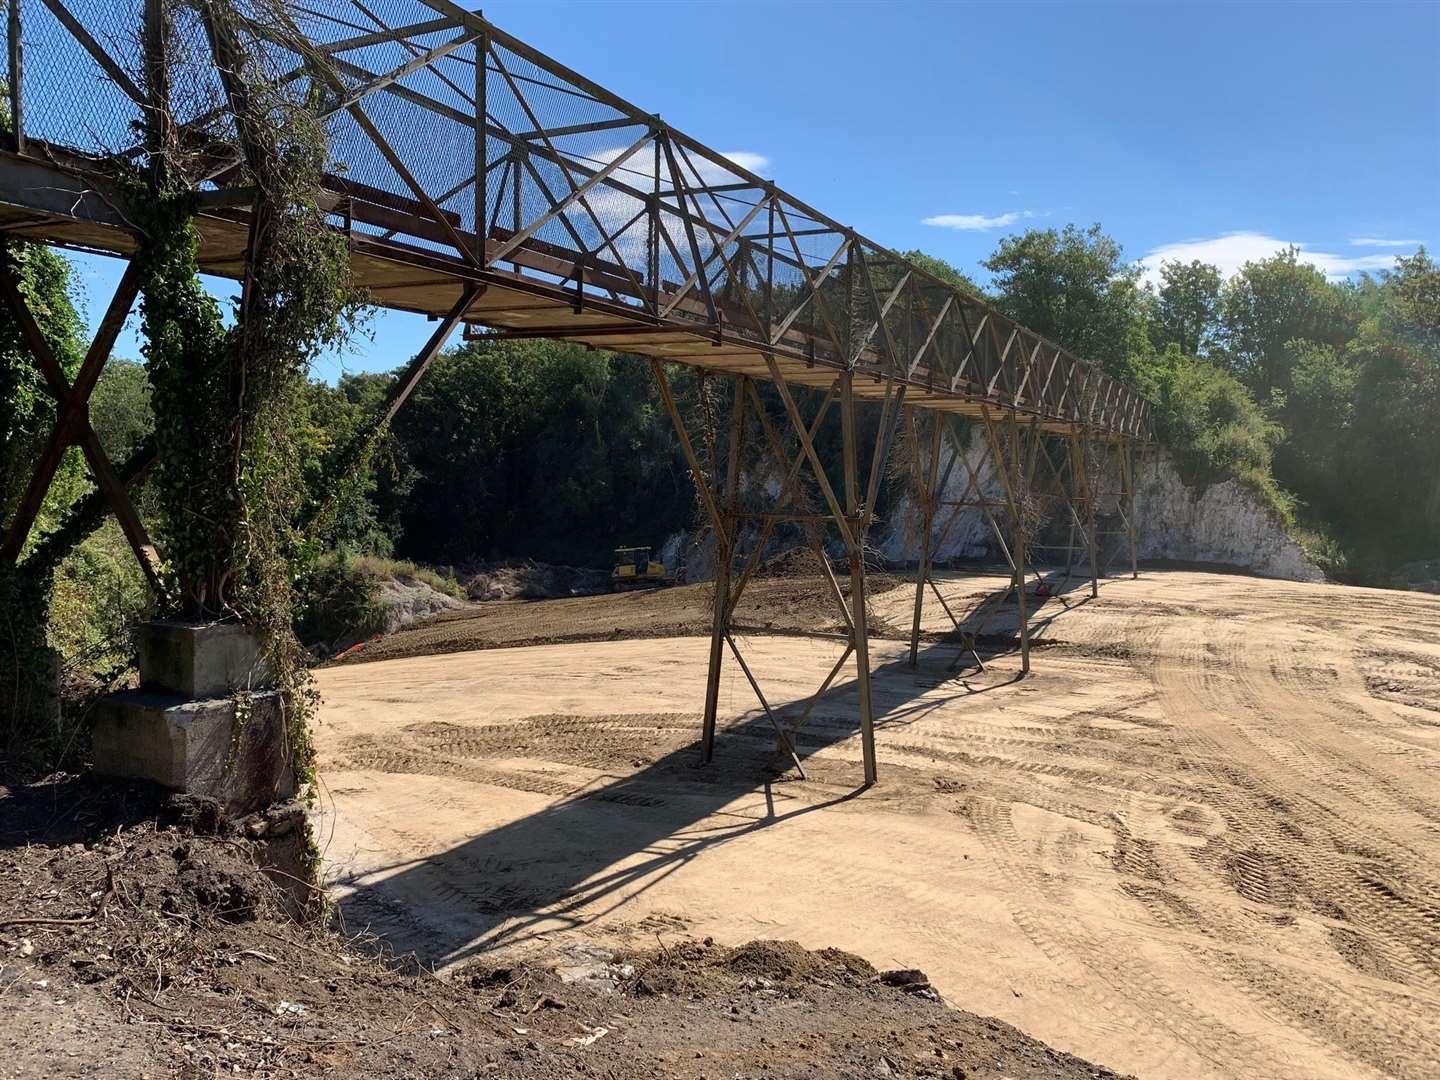 The old metal bridge over Craylands Gorge has been demolished and replaced with a safer alternative.